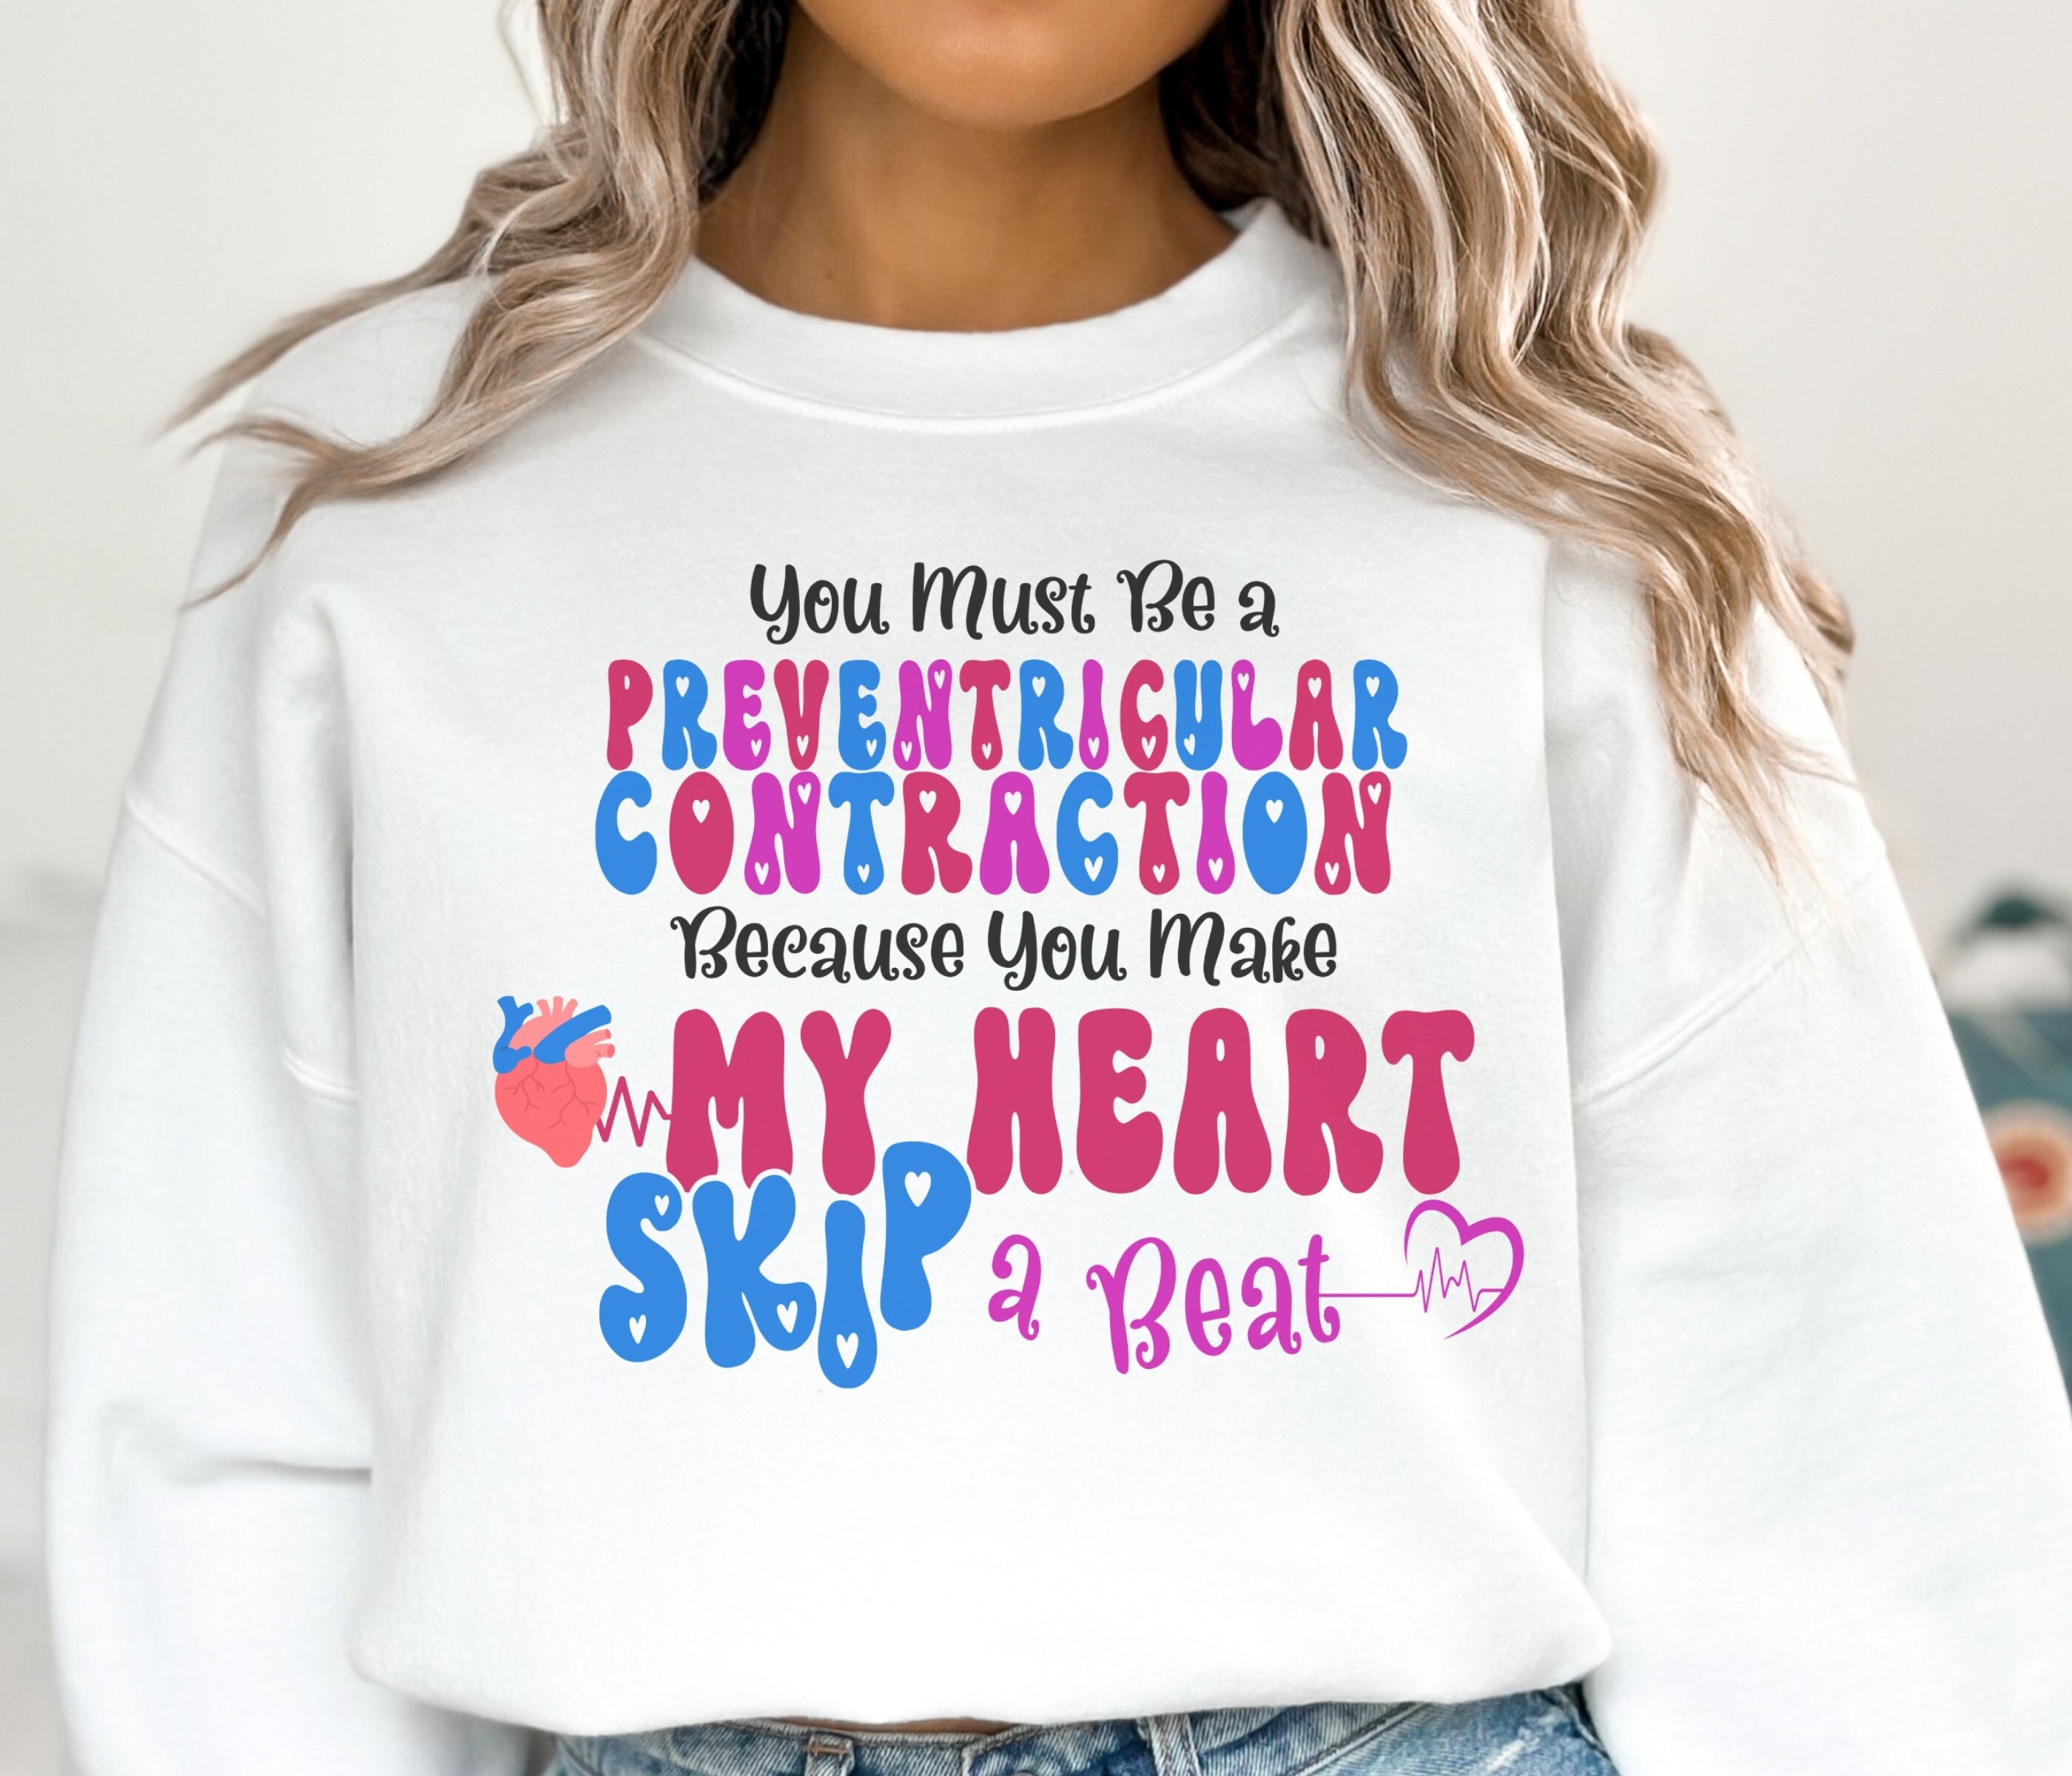 HUANCALY Valentine's Day Womens T Shirts Lace Up Colorful Print Long,Overstock  Items Clearance All,Under 10.00 Dollar Items for Women,My cart Items,My  Past Orders